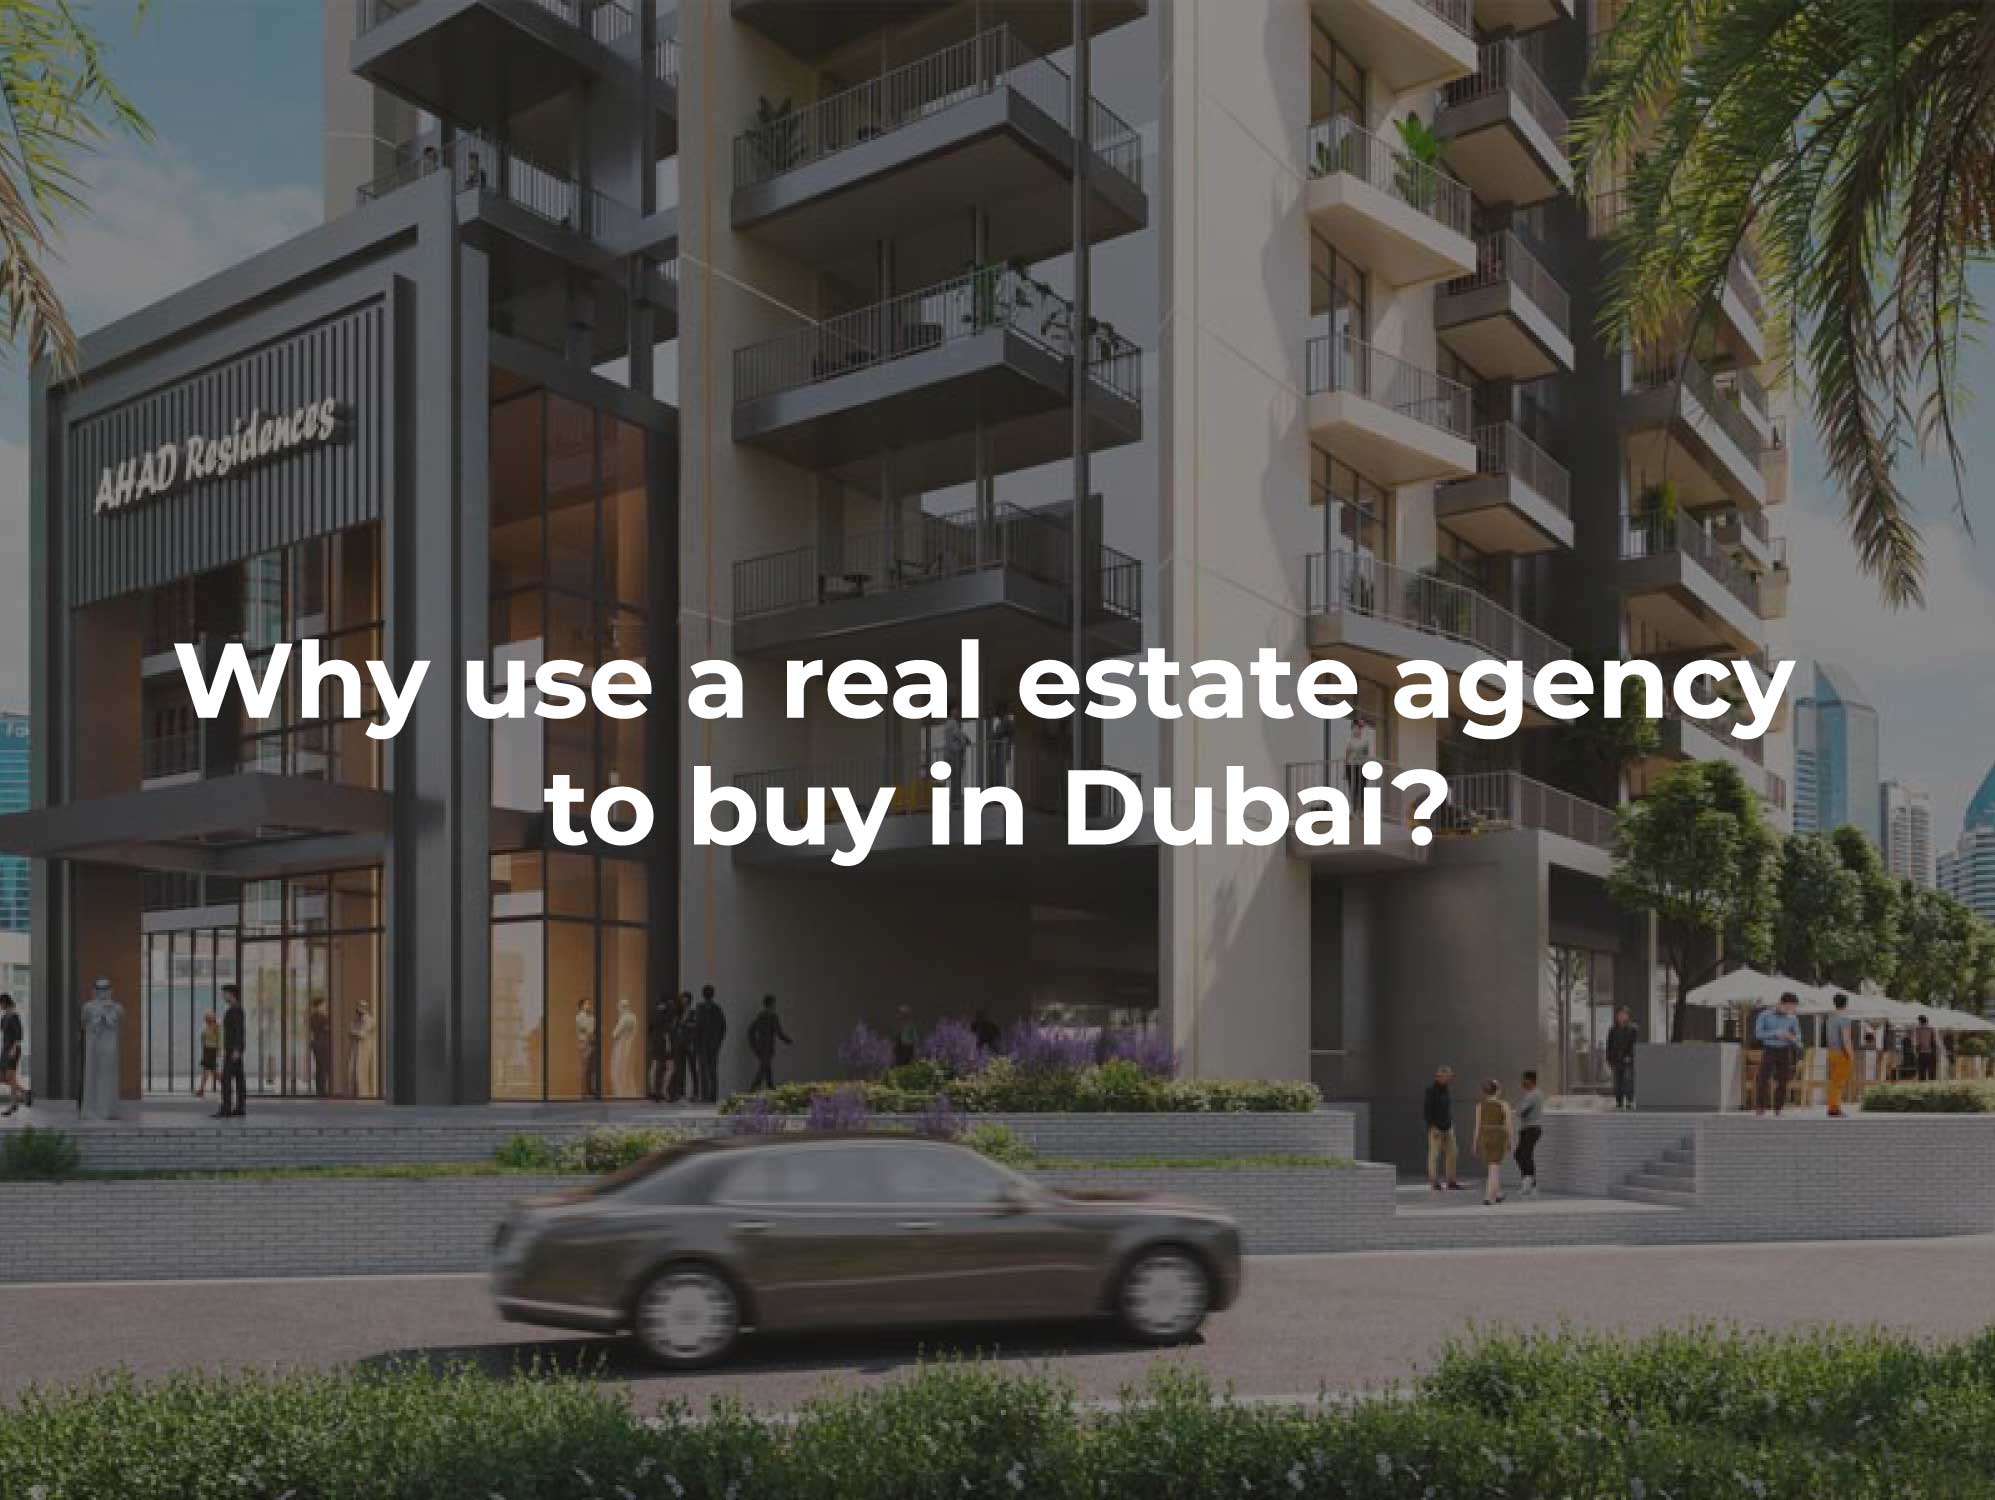 Why use a real estate agency to buy in Dubai?